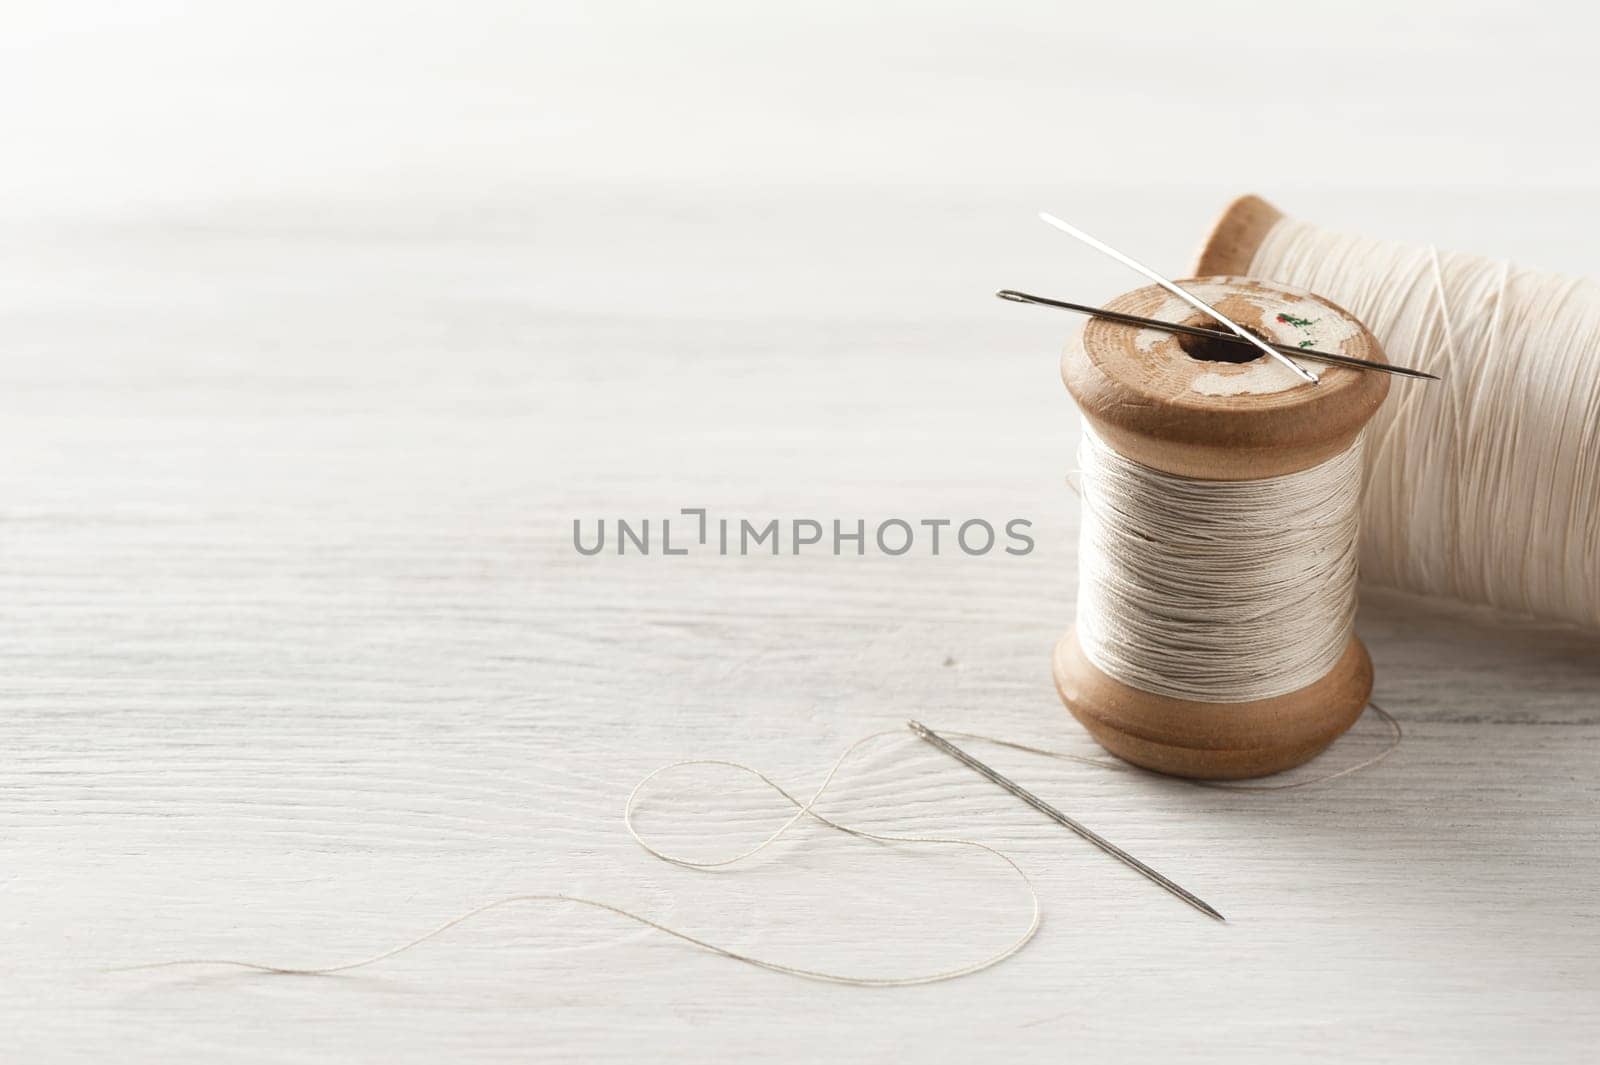 closeup thread for sewing and needlework, old reel of thread